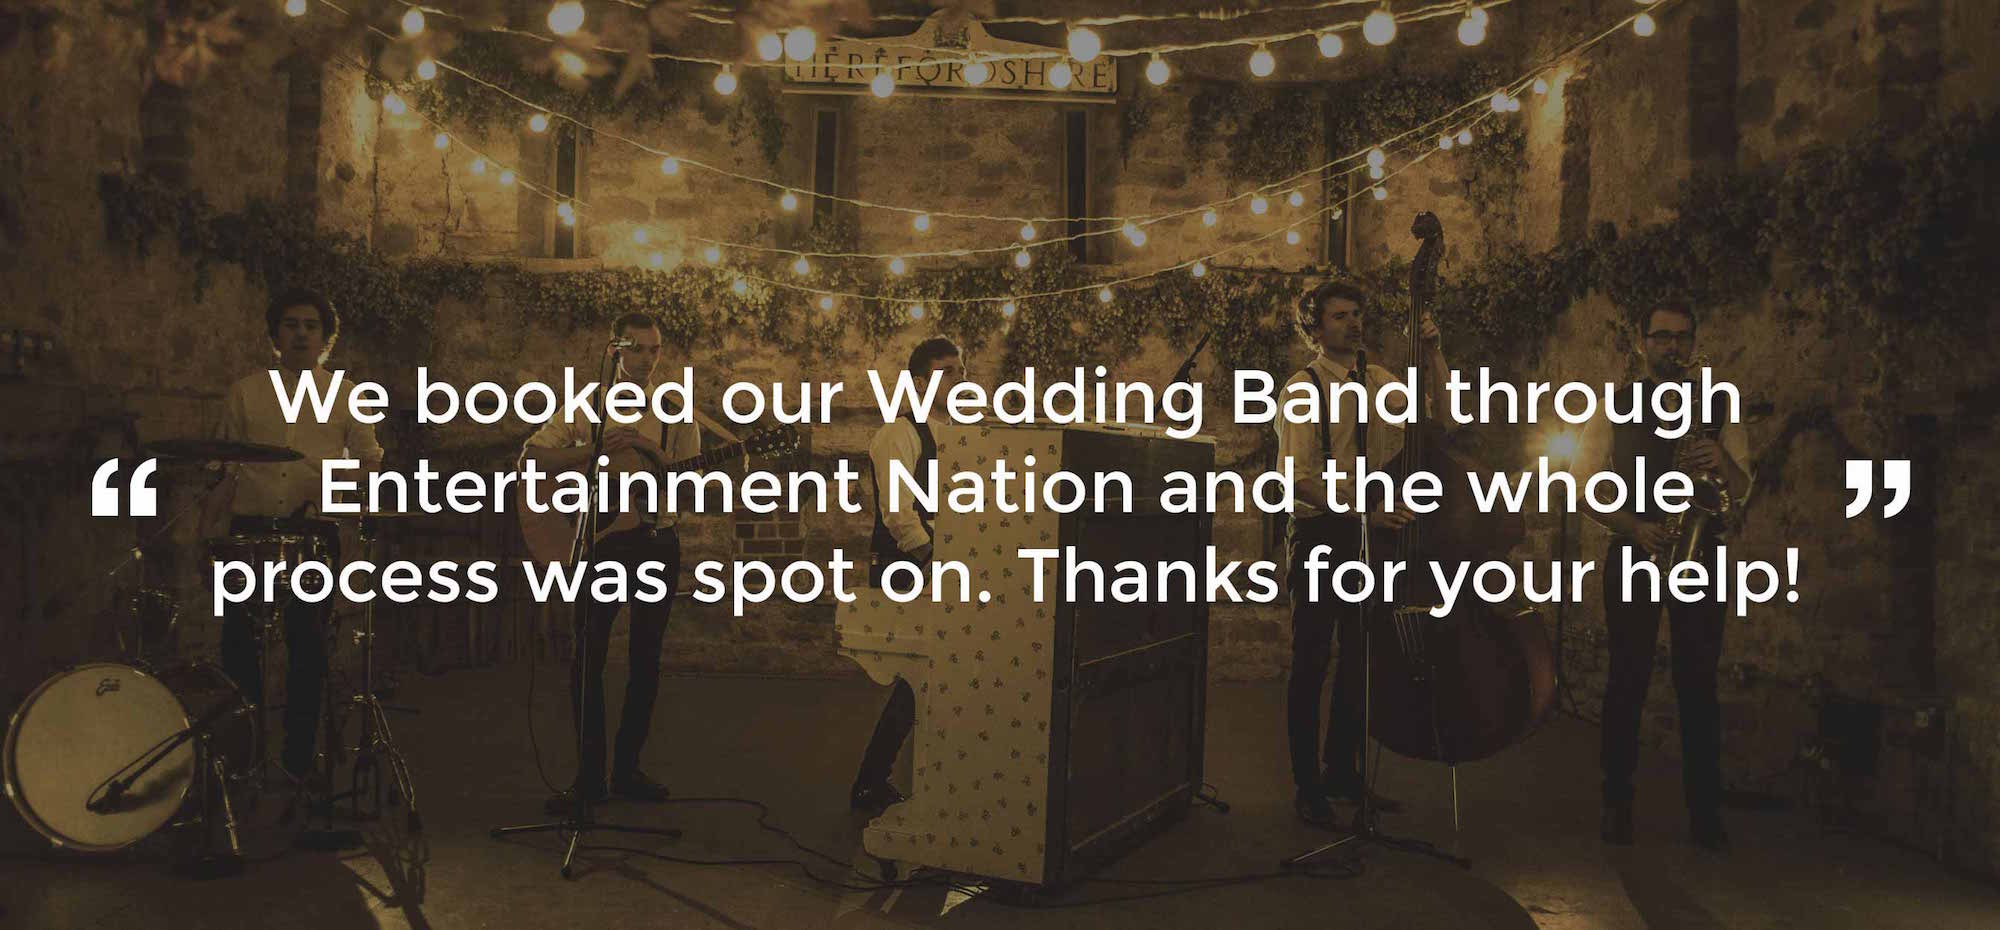 Review of Wedding Band Manchester